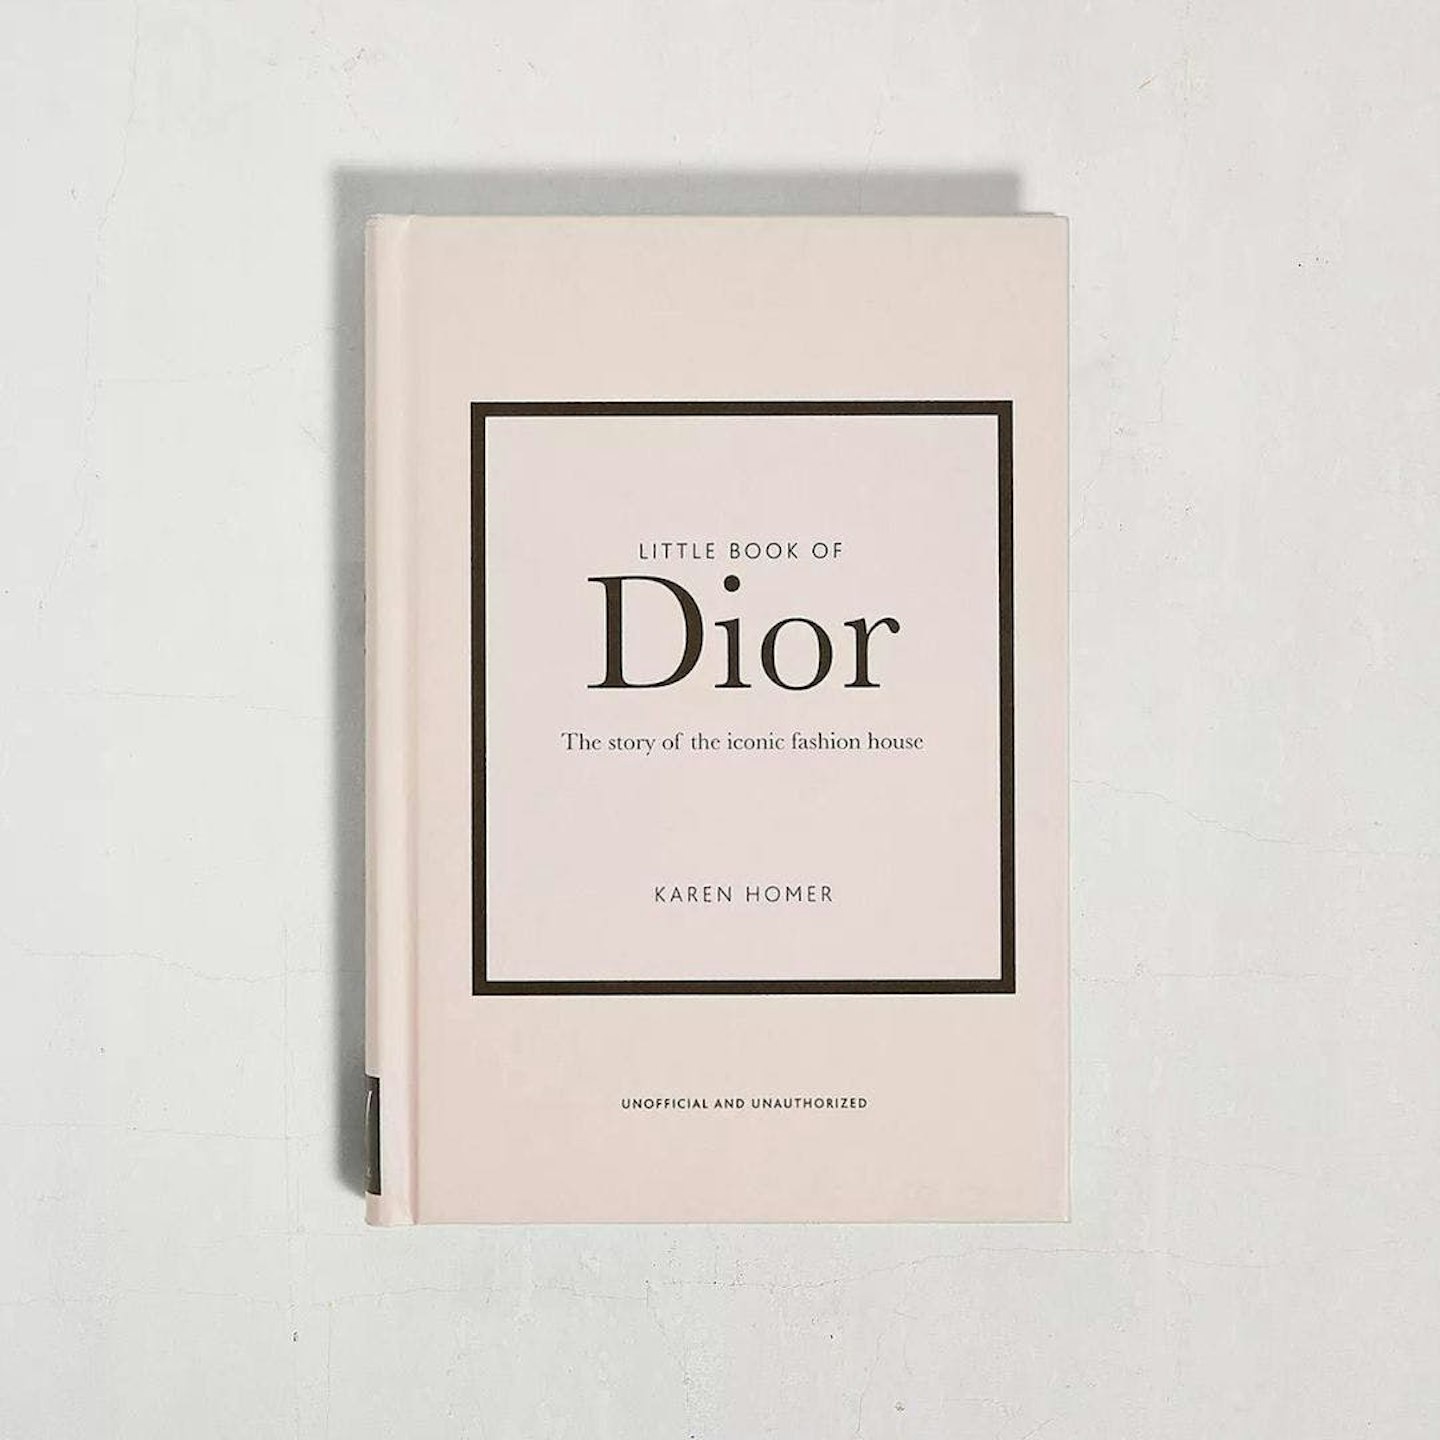 Little Book Of Dior: The Story Of The Iconic Fashion House By Karen Homer